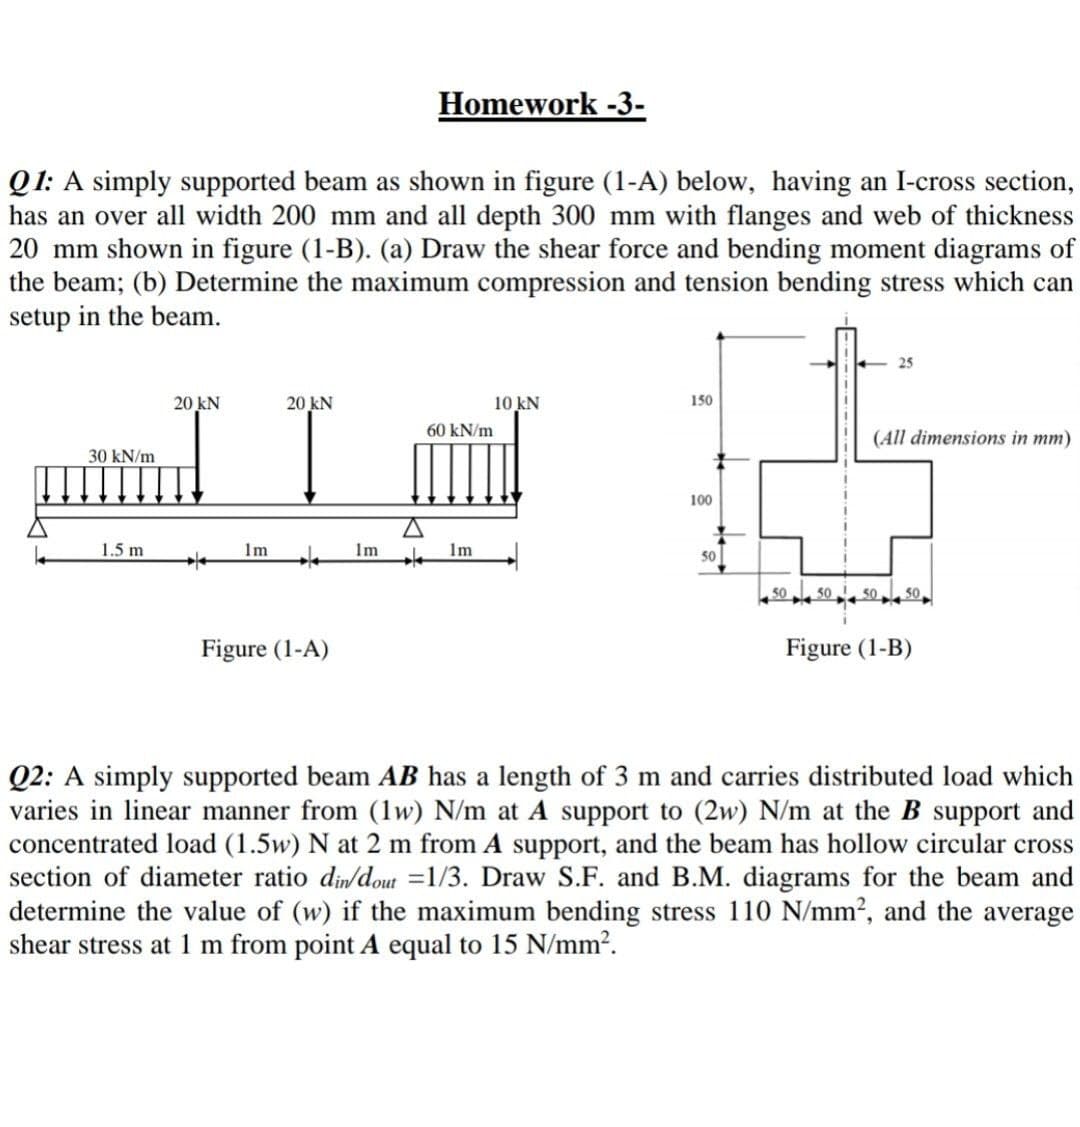 Homework -3-
Q1: A simply supported beam as shown in figure (1-A) below, having an I-cross section,
has an over all width 200 mm and all depth 300 mm with flanges and web of thickness
20 mm shown in figure (1-B). (a) Draw the shear force and bending moment diagrams of
the beam; (b) Determine the maximum compression and tension bending stress which can
setup in the beam.
25
20 kN
20 kN
10 kN
150
60 kN/m
(All dimensions in mm)
30 kN/m
100
1.5 m
Im
Im
Im
50
50
50
50
50
Figure (1-A)
Figure (1-B)
Q2: A simply supported beam AB has a length of 3 m and carries distributed load which
varies in linear manner from (1w) N/m at A support to (2w) N/m at the B support and
concentrated load (1.5w) N at 2 m from A support, and the beam has hollow circular cross
section of diameter ratio dindout =1/3. Draw S.F. and B.M. diagrams for the beam and
determine the value of (w) if the maximum bending stress 110 N/mm?, and the average
shear stress at 1 m from point A equal to 15 N/mm?.
